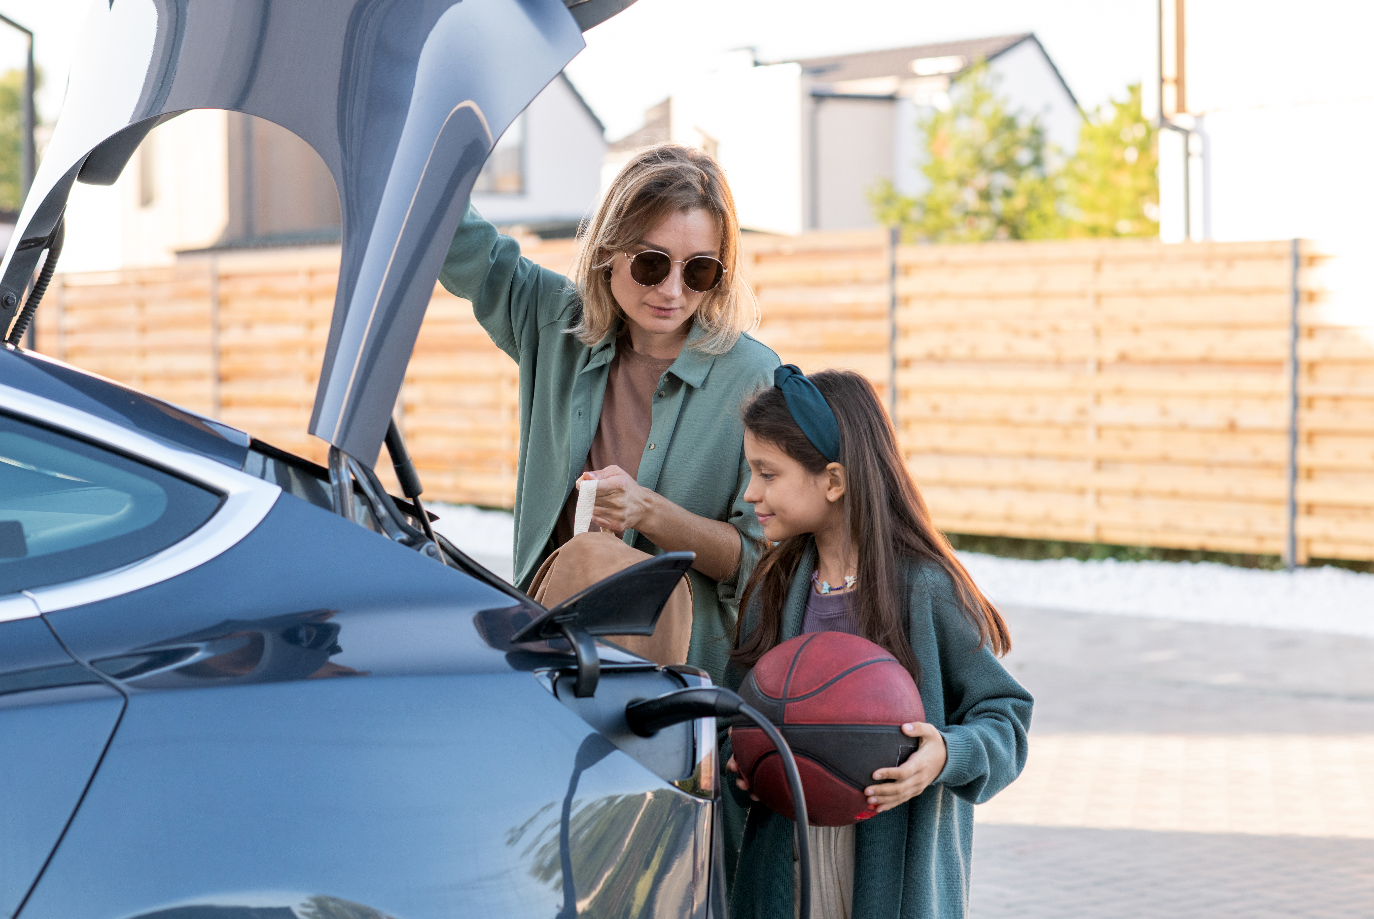 A lady opening the trunk of an electric vehicle, next to a child holding a basketball and smiling